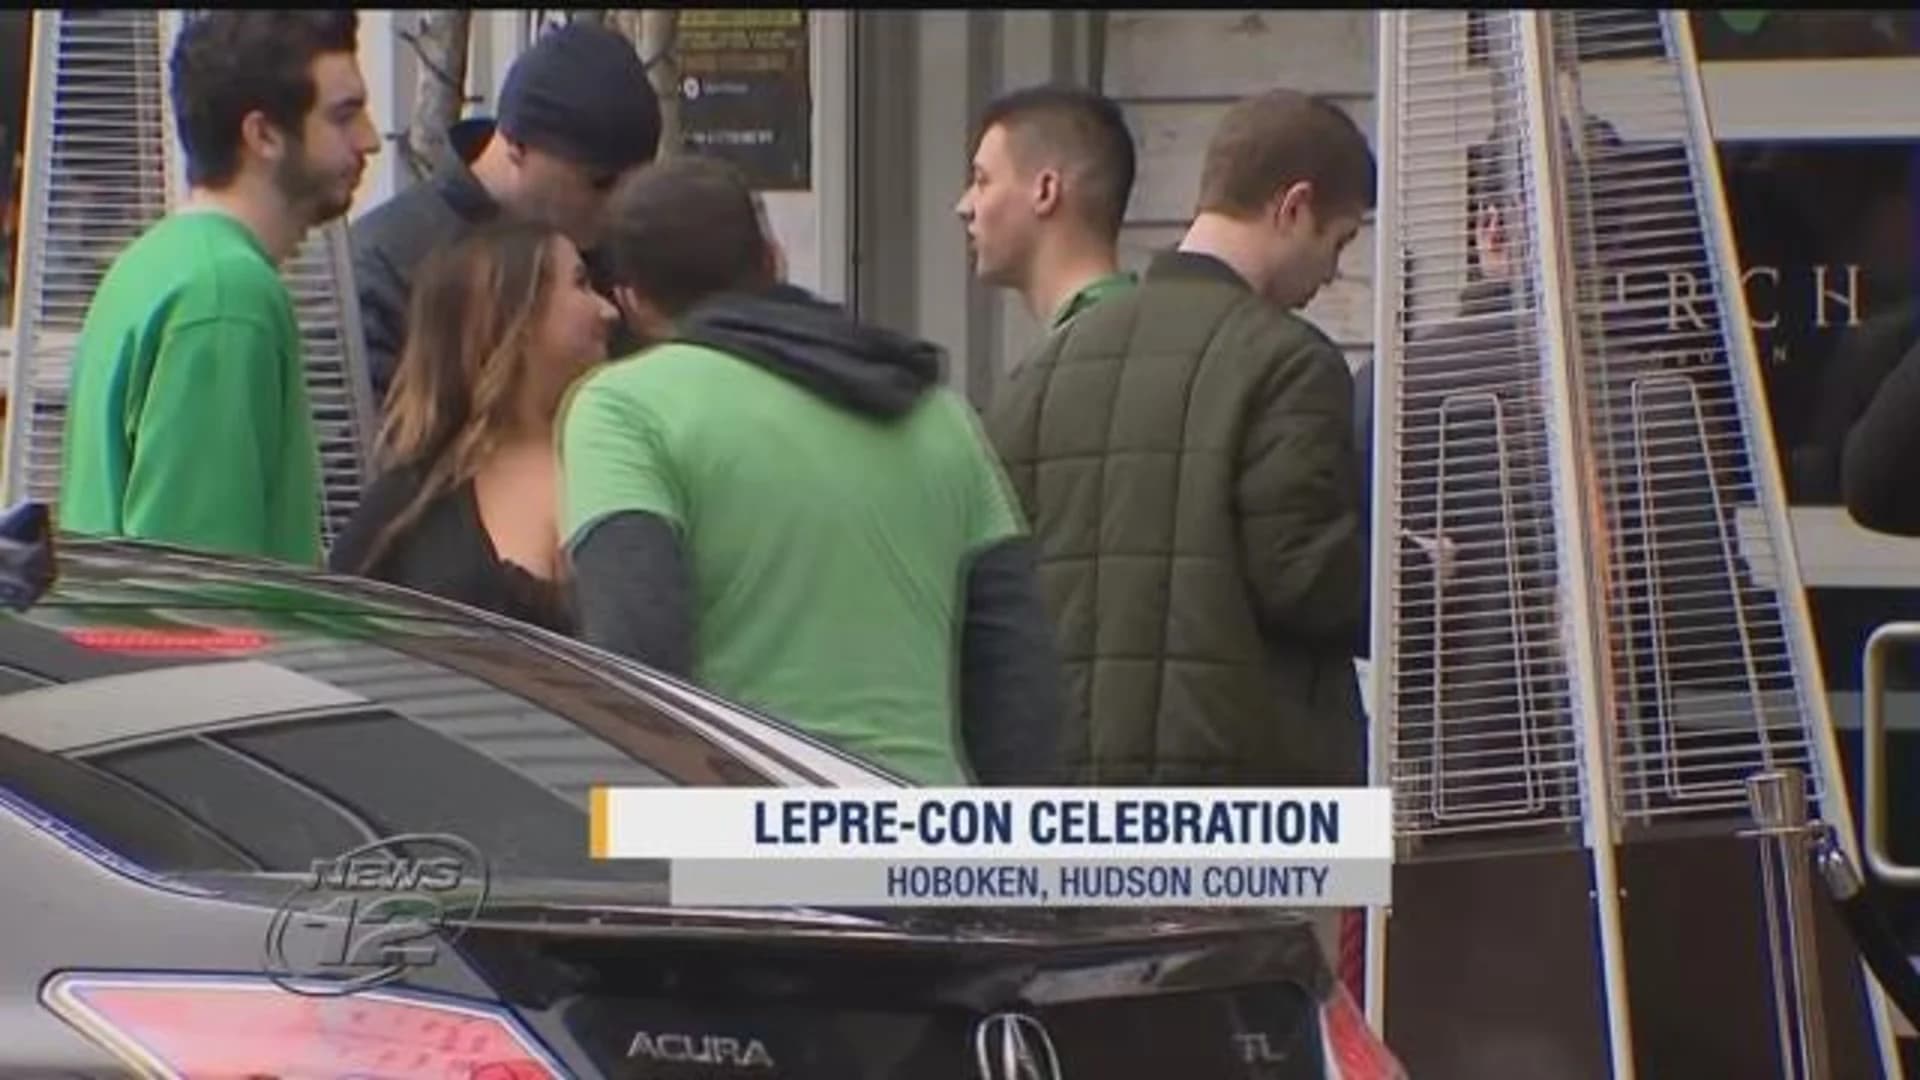 Police: 4 arrests linked to LepreCon